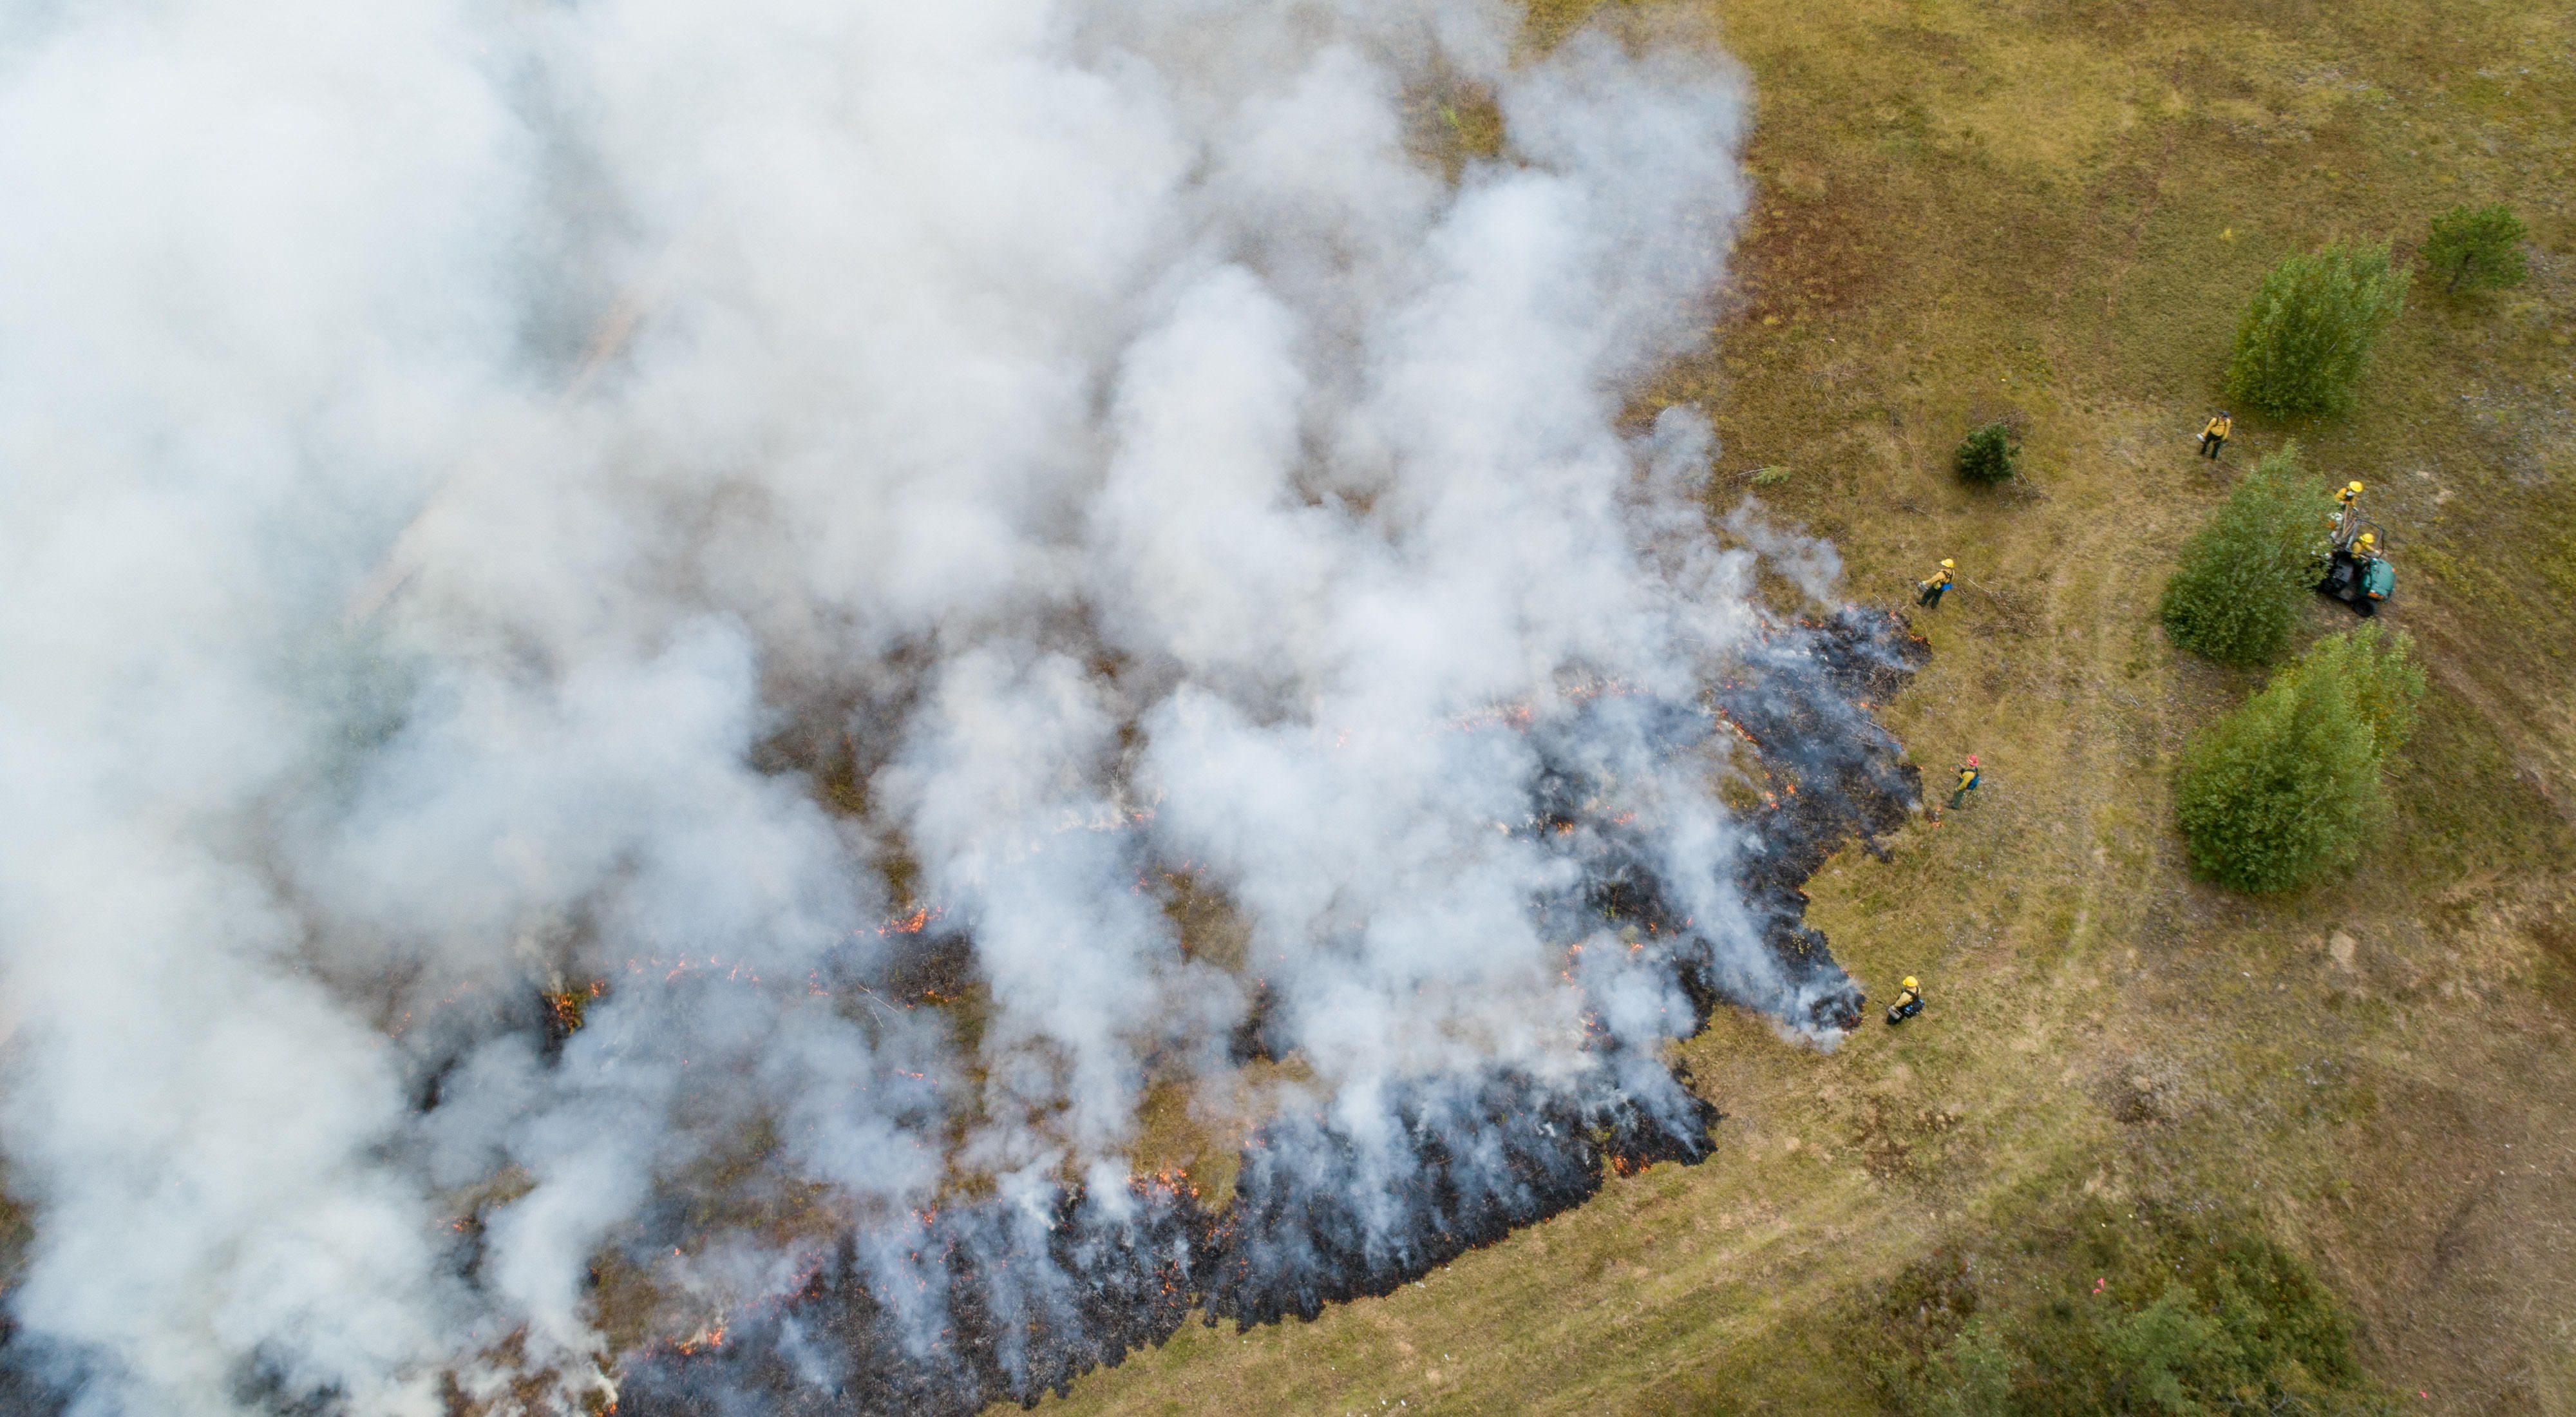 Crew members work the edges of a controlled burn on the grassland at Kennebunk Plains Preserve.